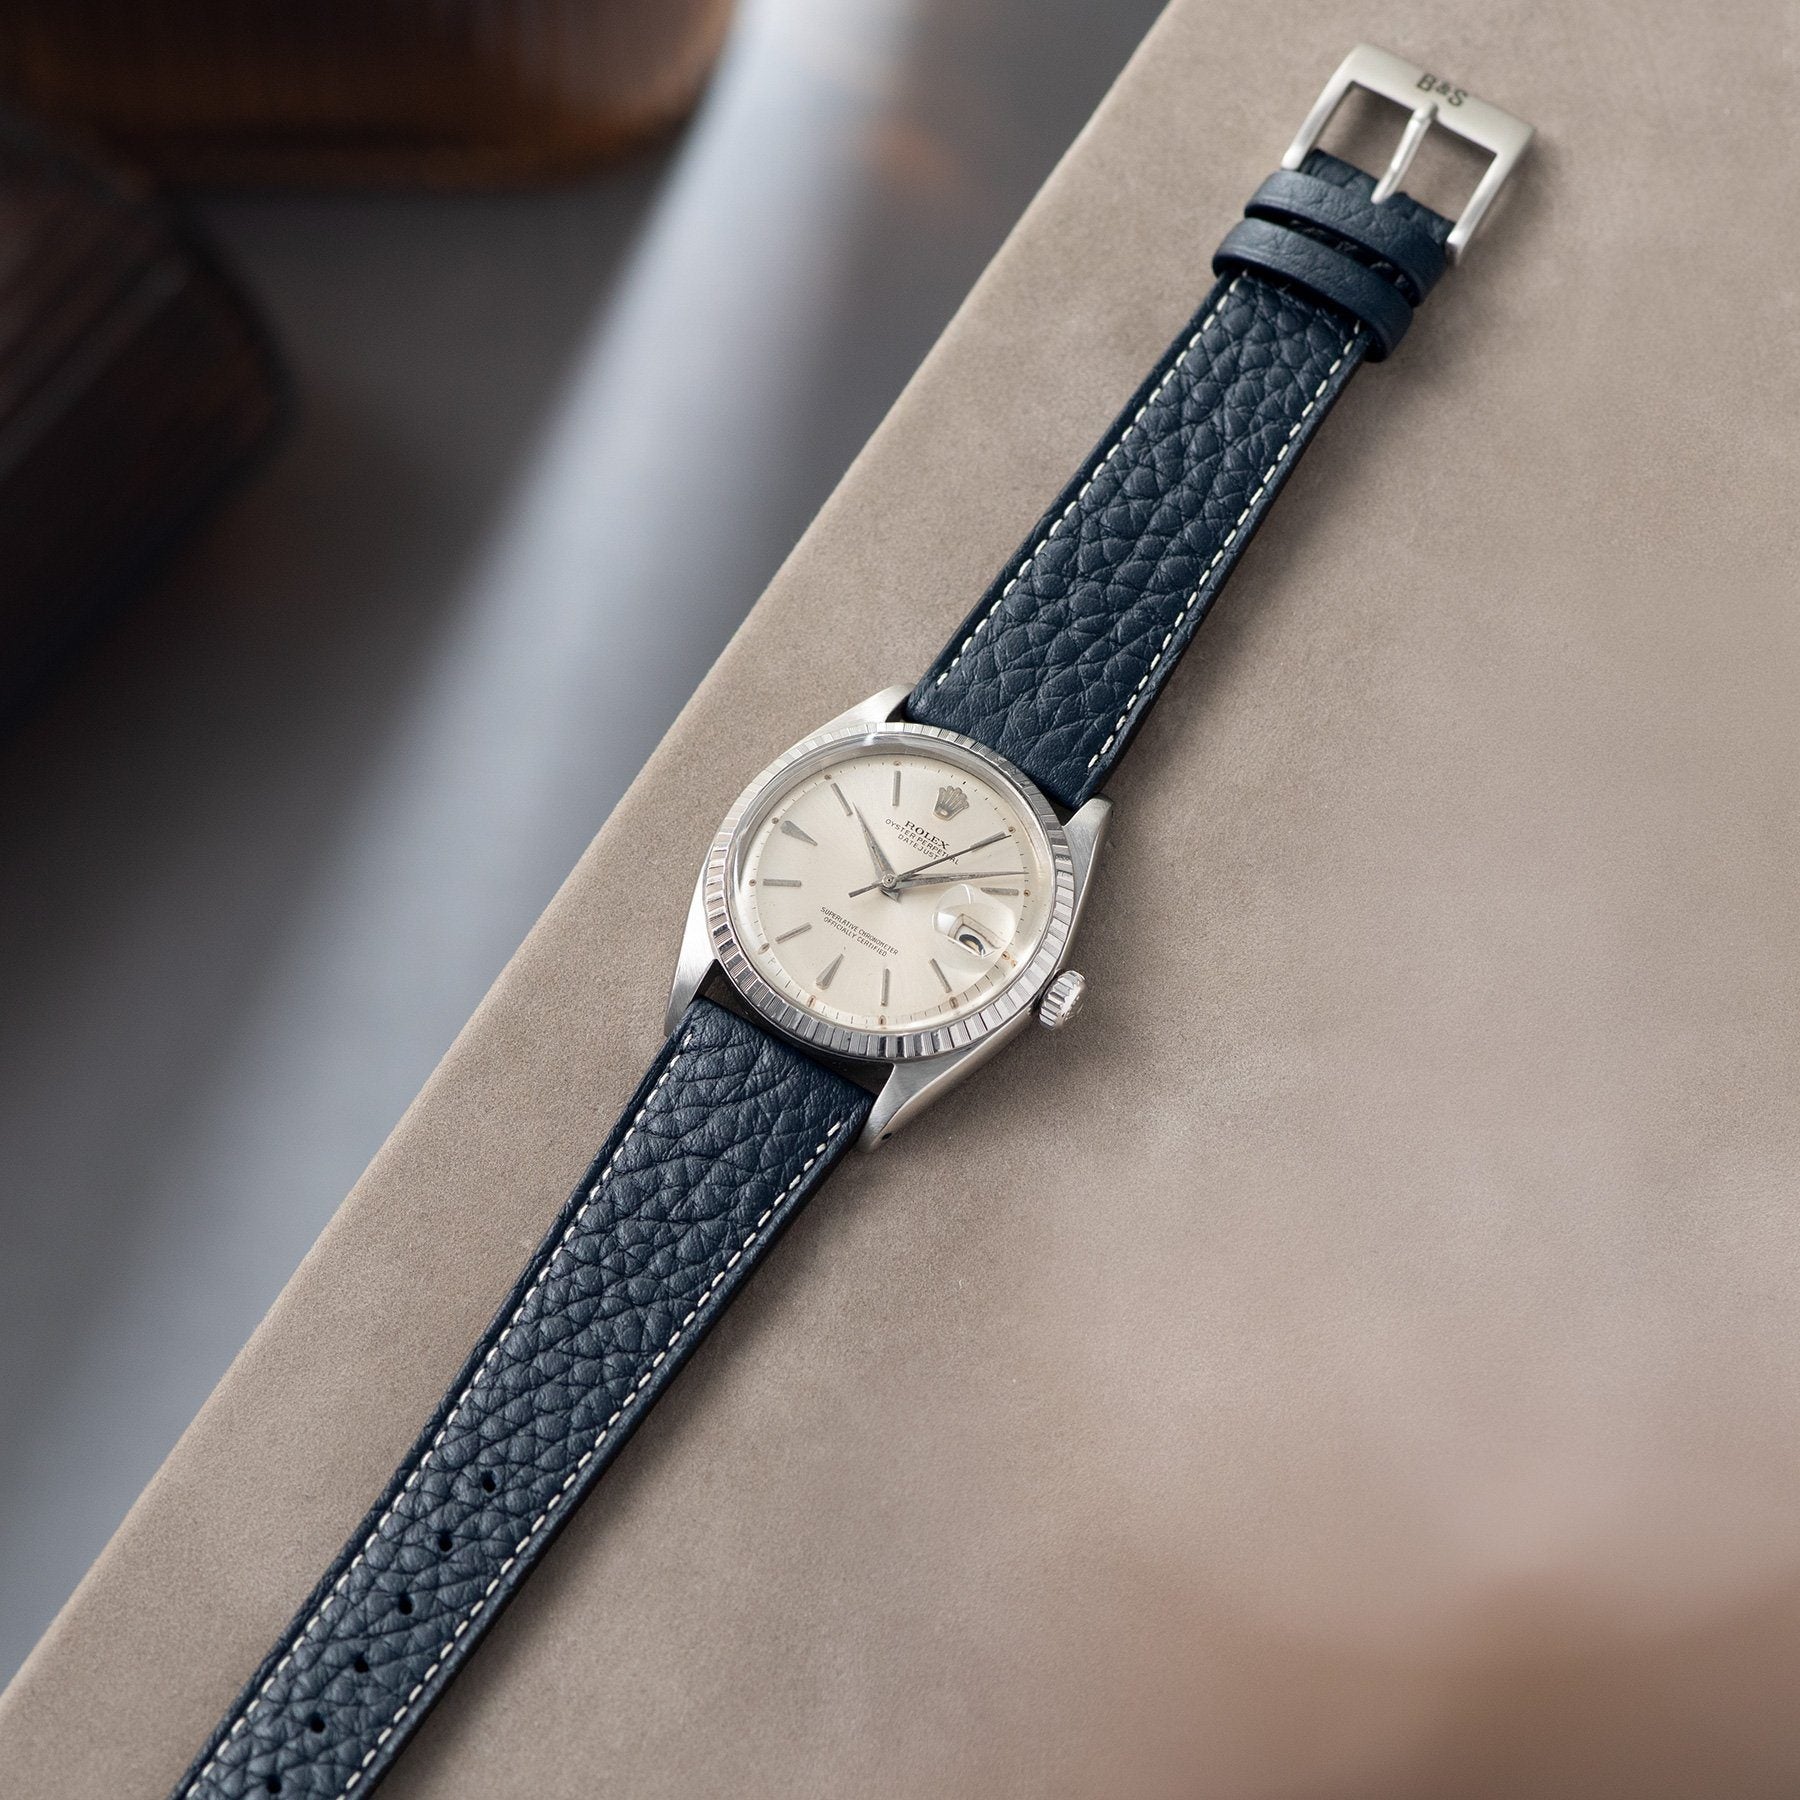 Taurillon Nocturne Blue Leather Watch Strap Change It